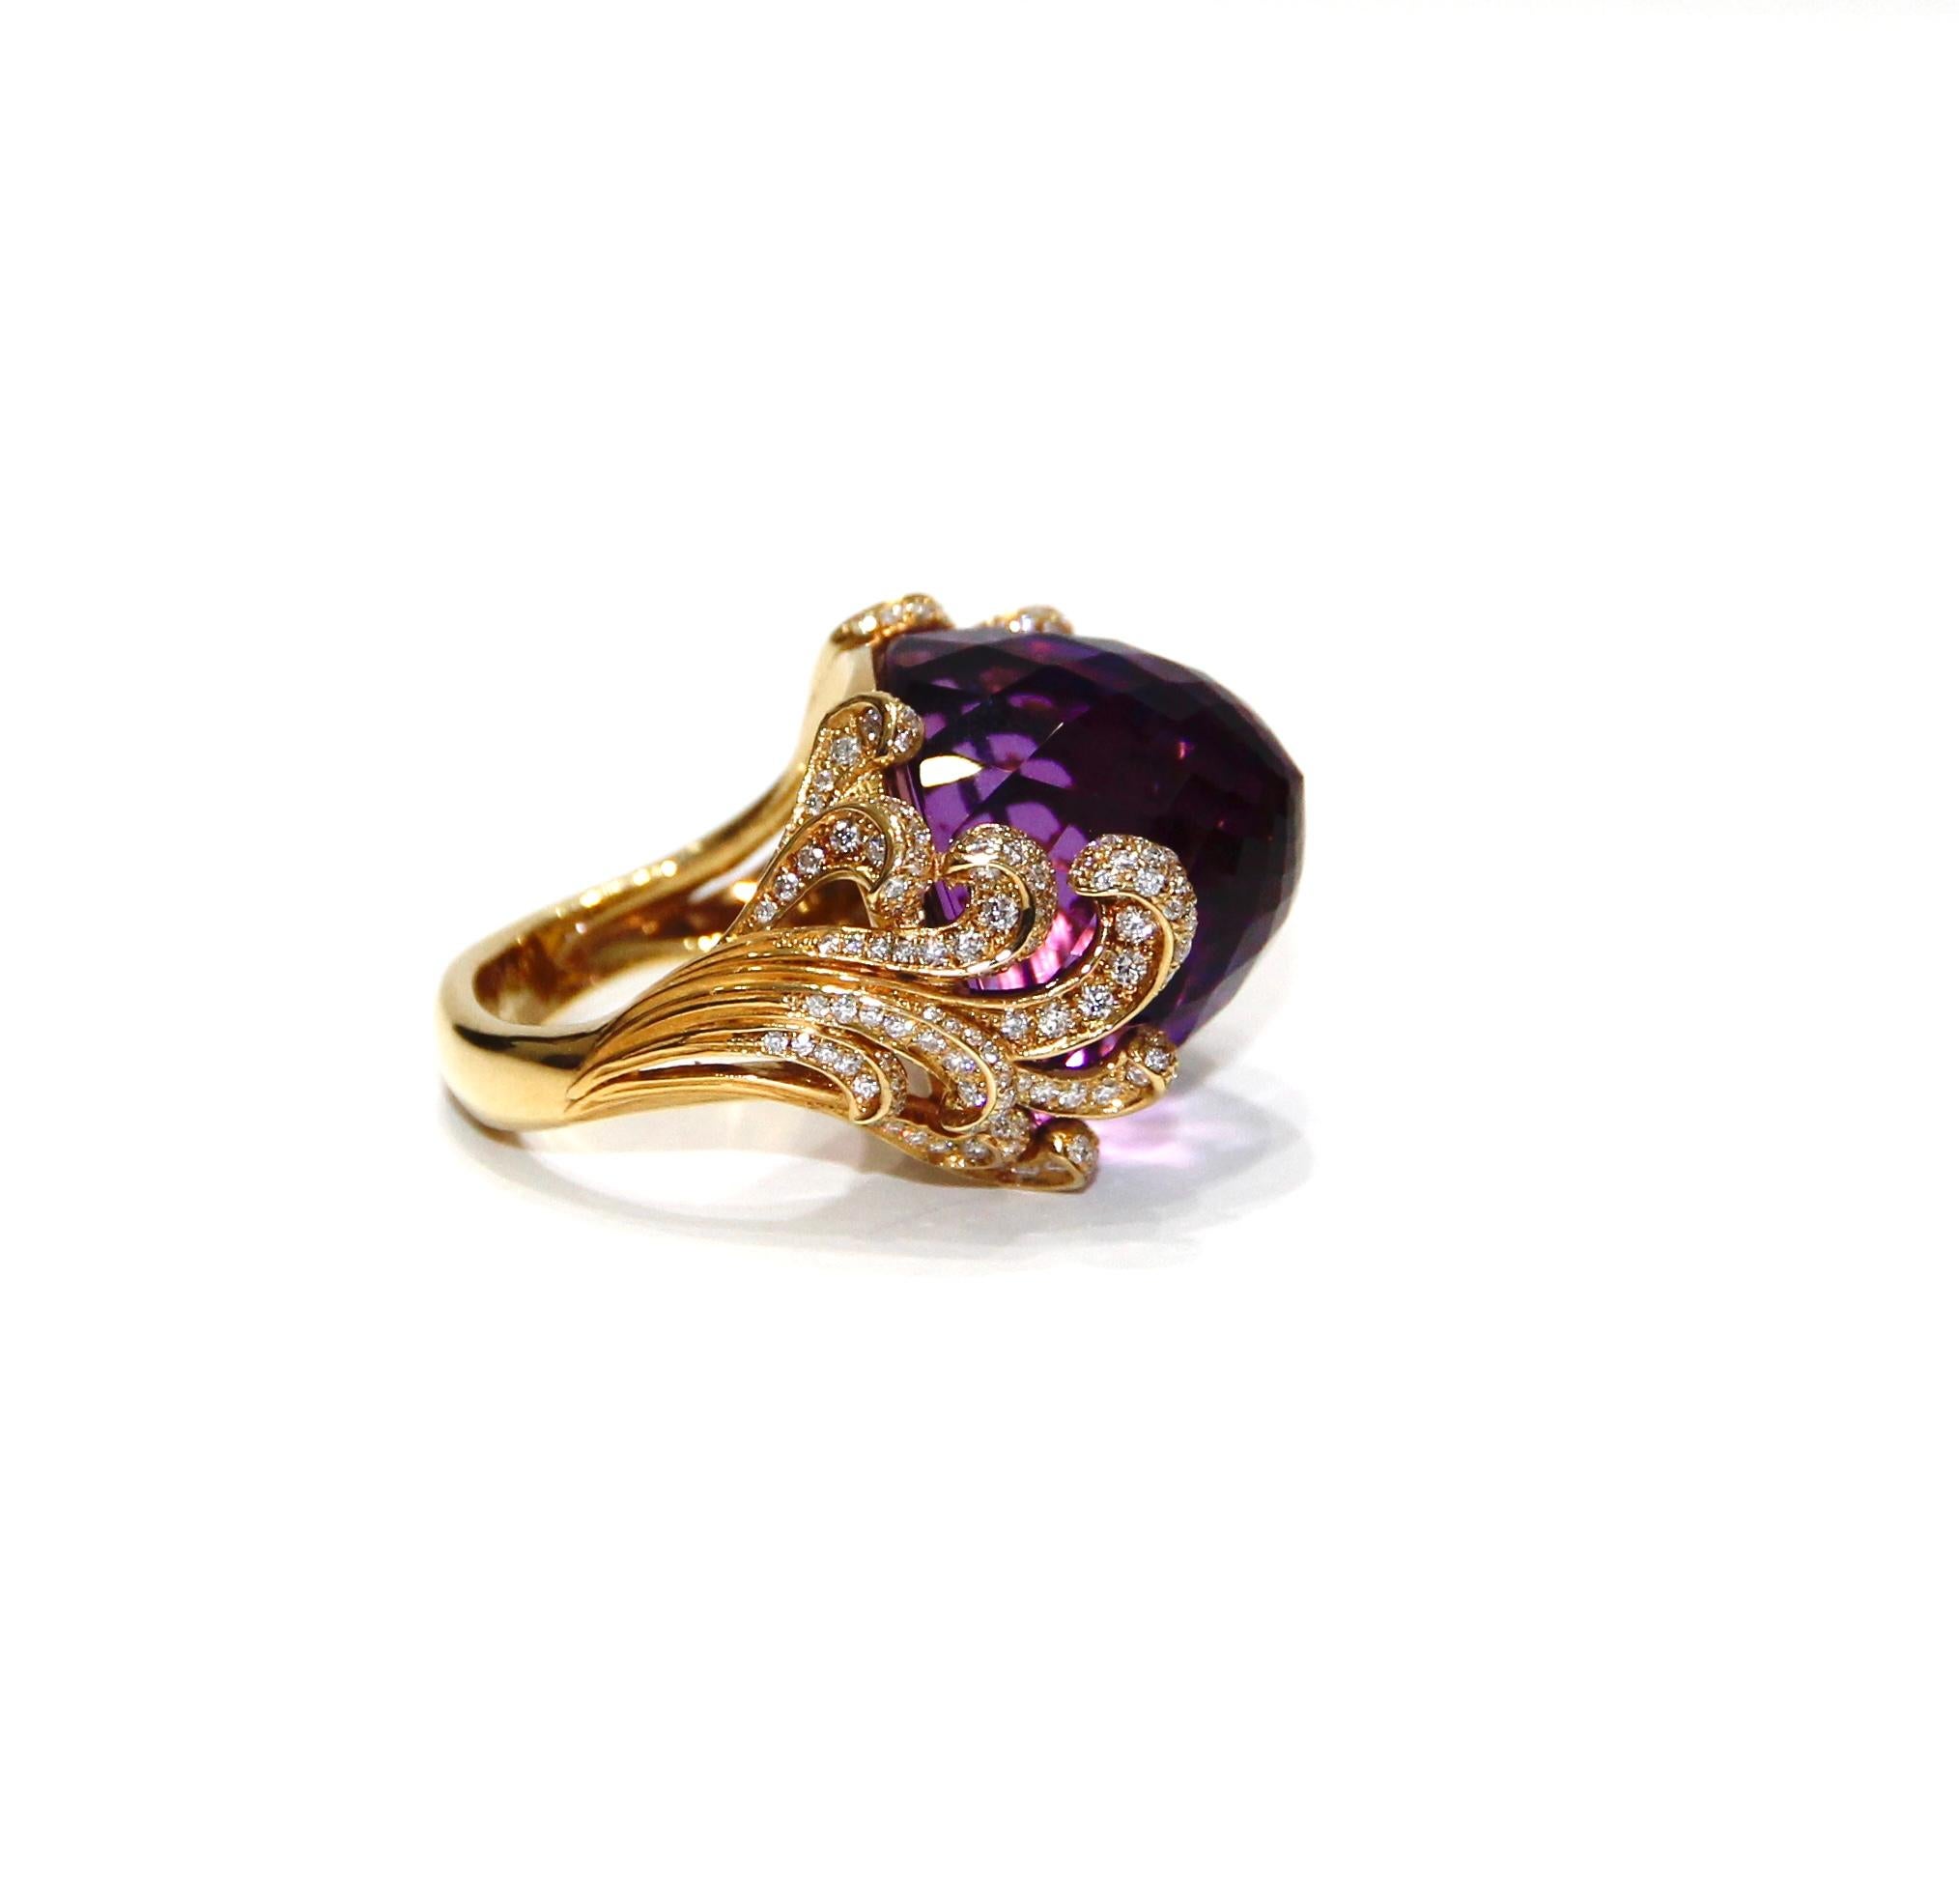 This Stunning Ring Constructed from 18kt yellow gold and 
adorned with diamonds and a stunning amethyst stone.
this Origen maxi ring from Carrera Y Carrera will be the focus of your looks. 
White Diamonds 0.8ctw
Cabochon Amethyst 29.81ct
Retail